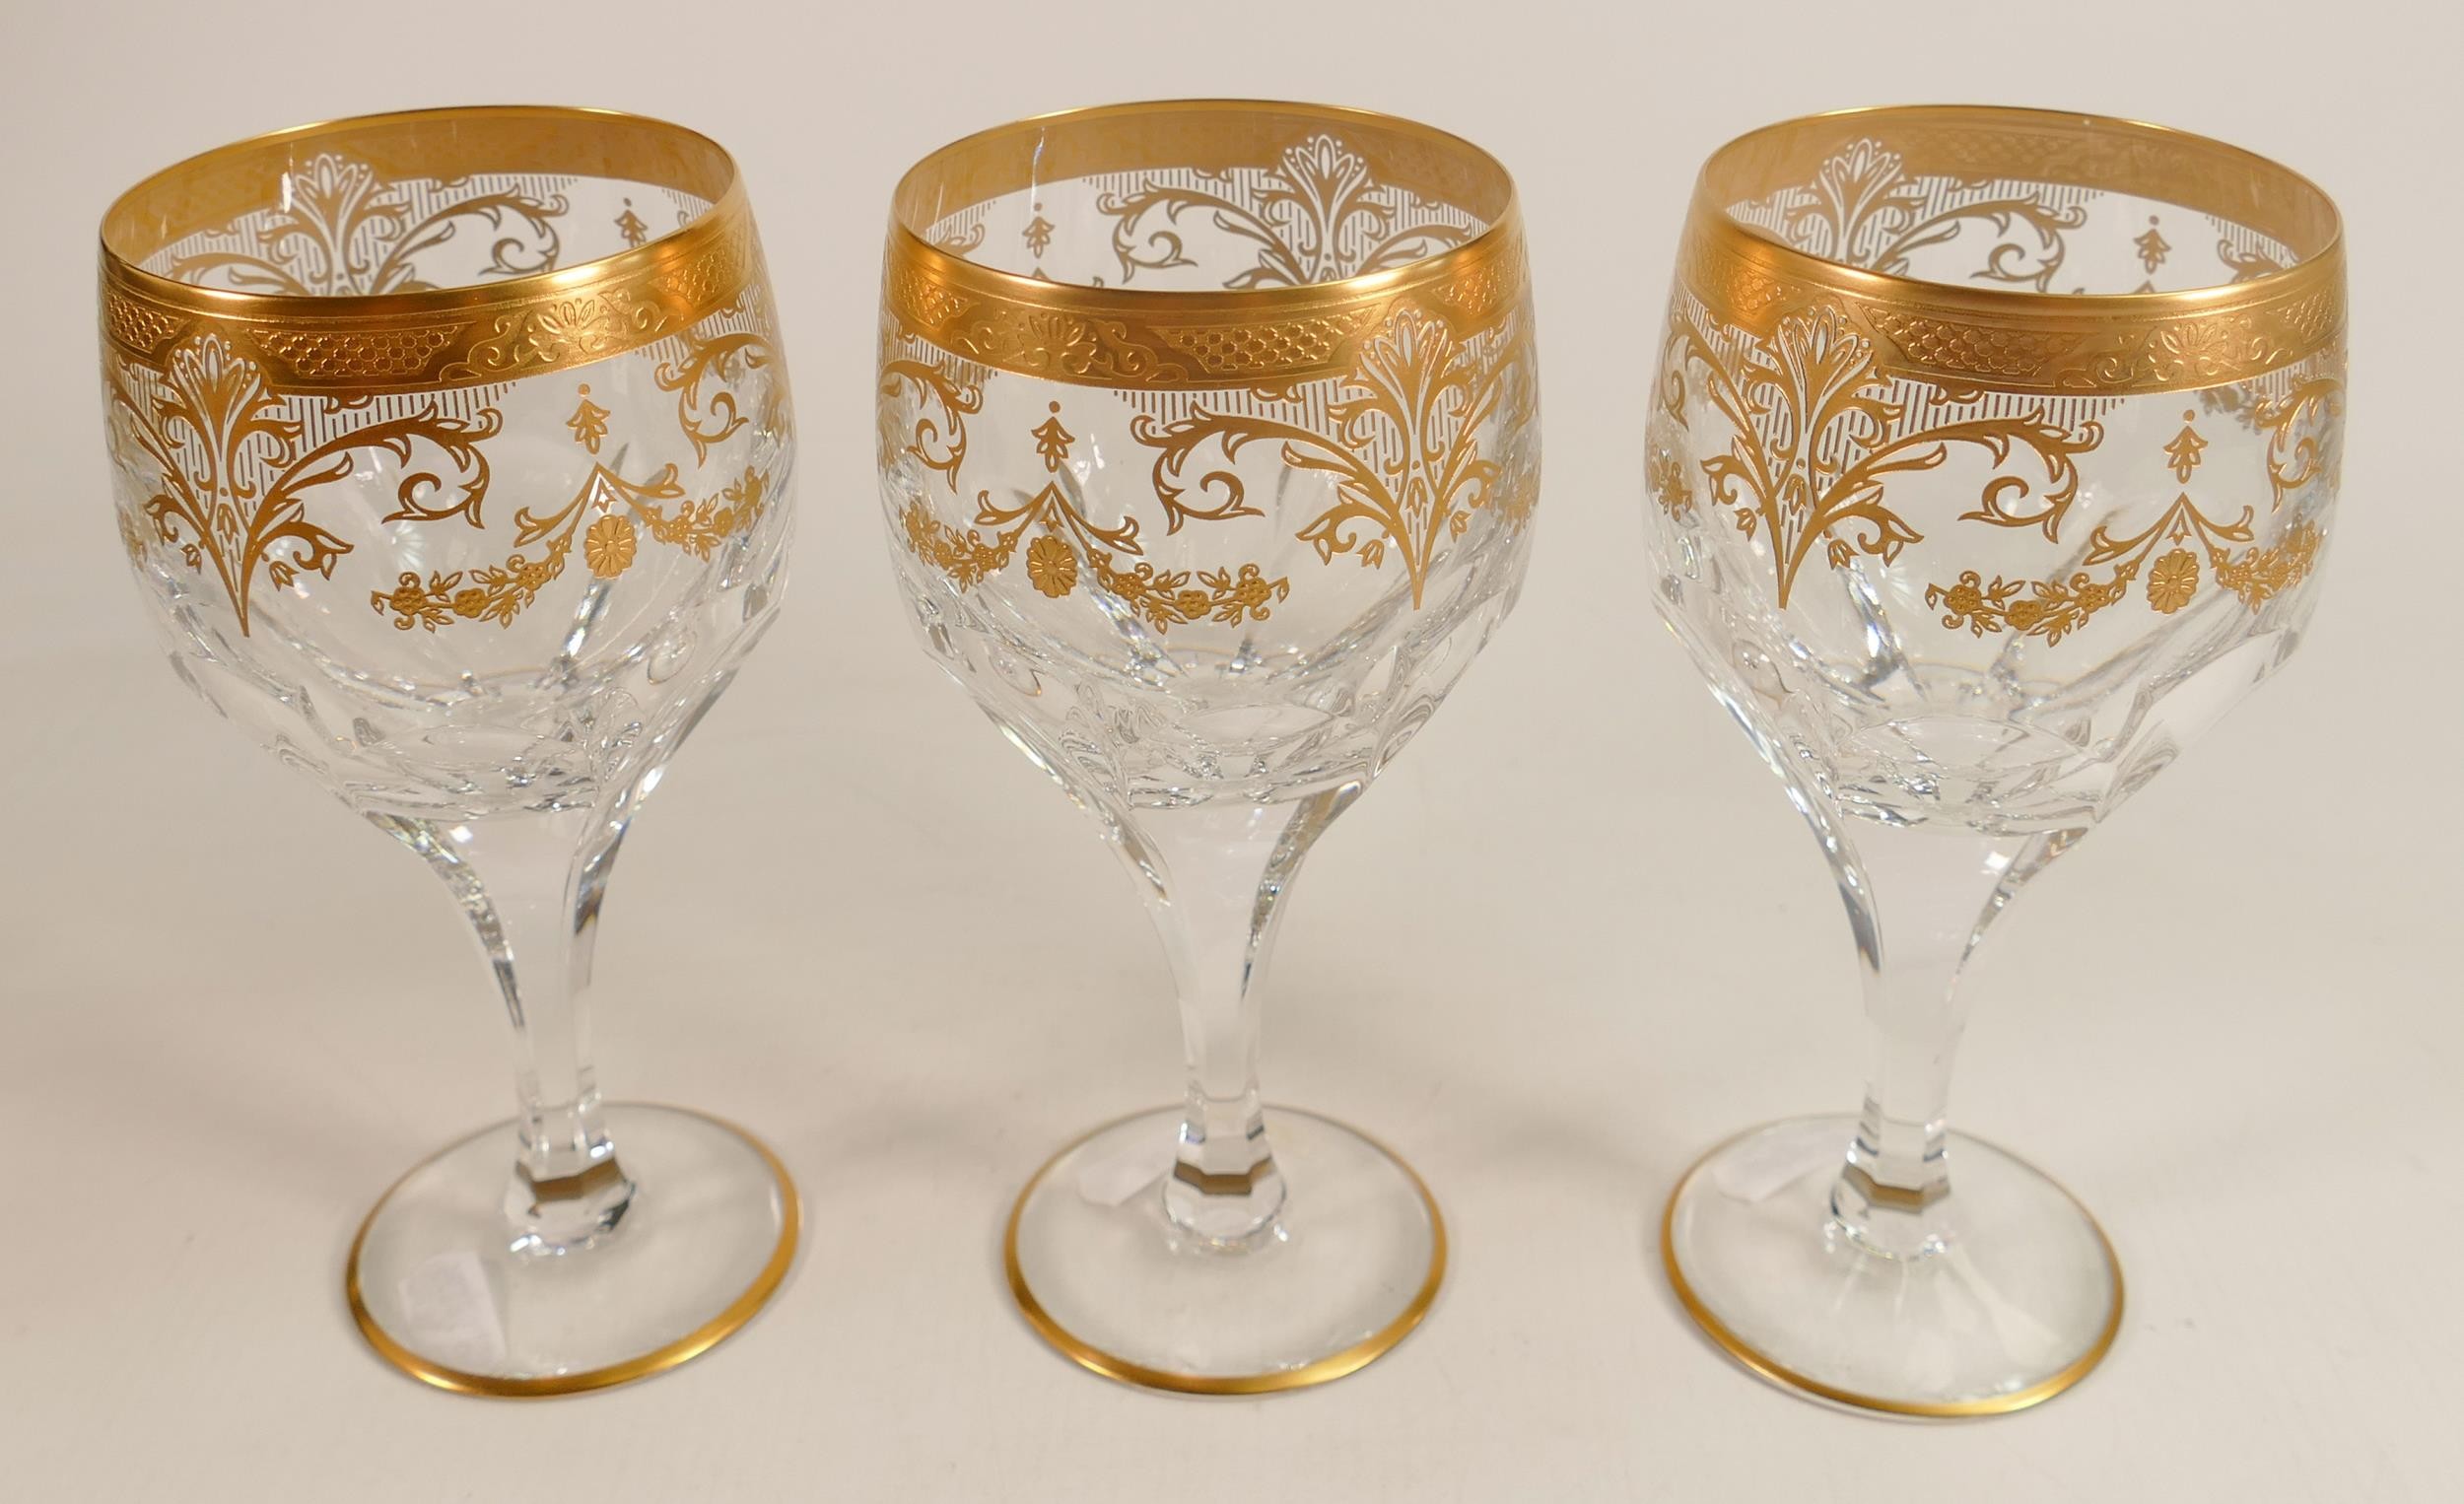 De Lamerie fine crystal heavily gilded glass goblets, specially made high end quality items, - Image 4 of 4